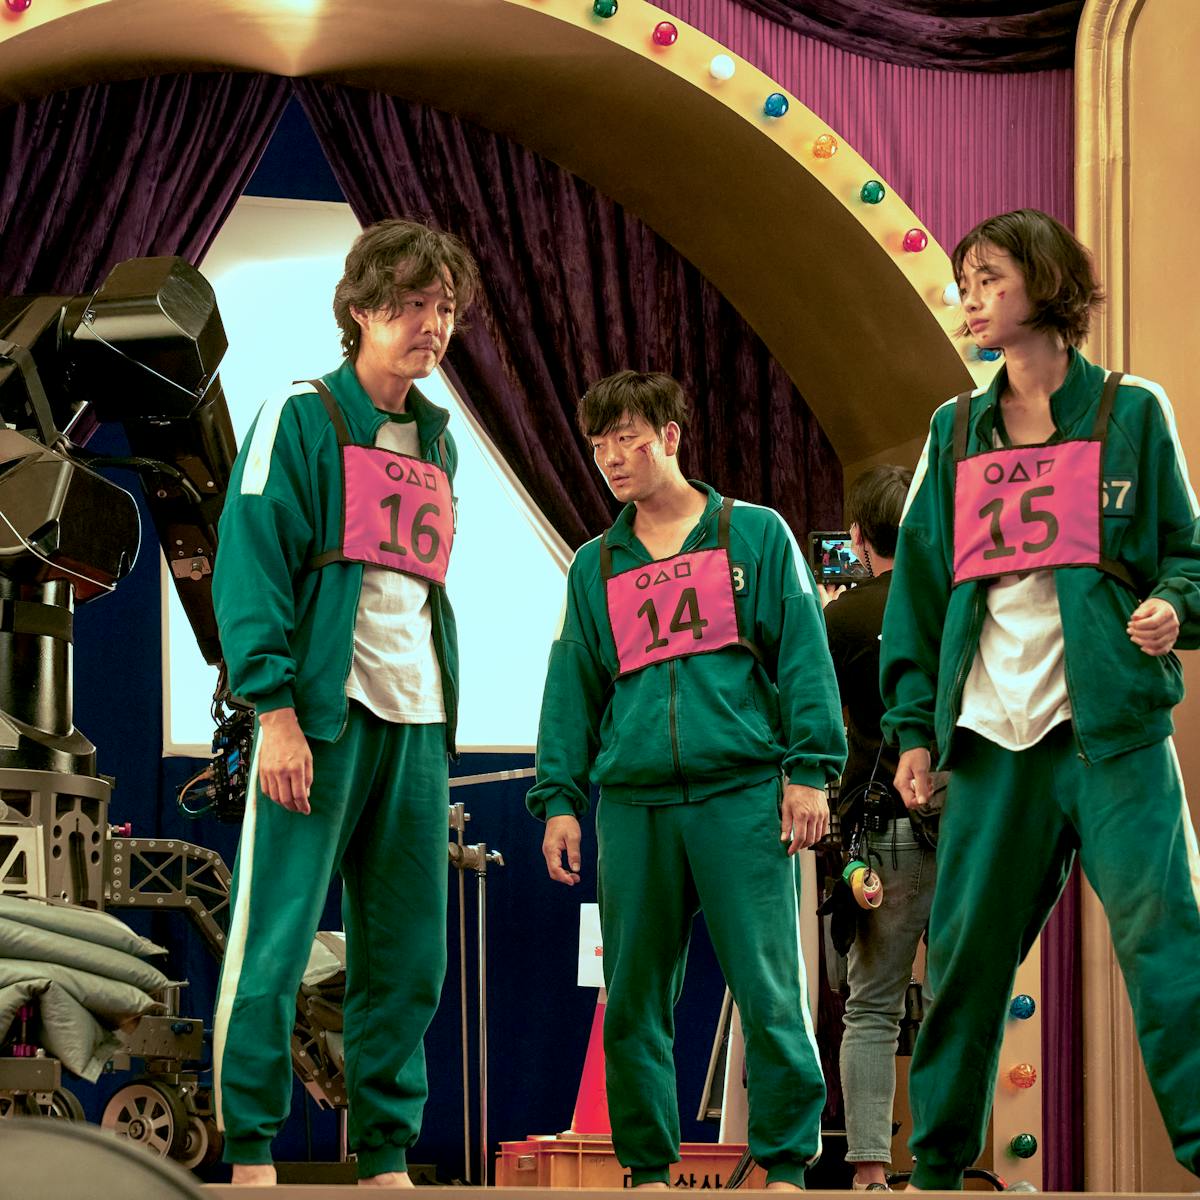 Lee Jung-jae, Park Hae-soo, and Jung Ho-yeon wear their green tracksuits with their numbers in pink on their chest. They are surrounded by colorful lights and camera gear.